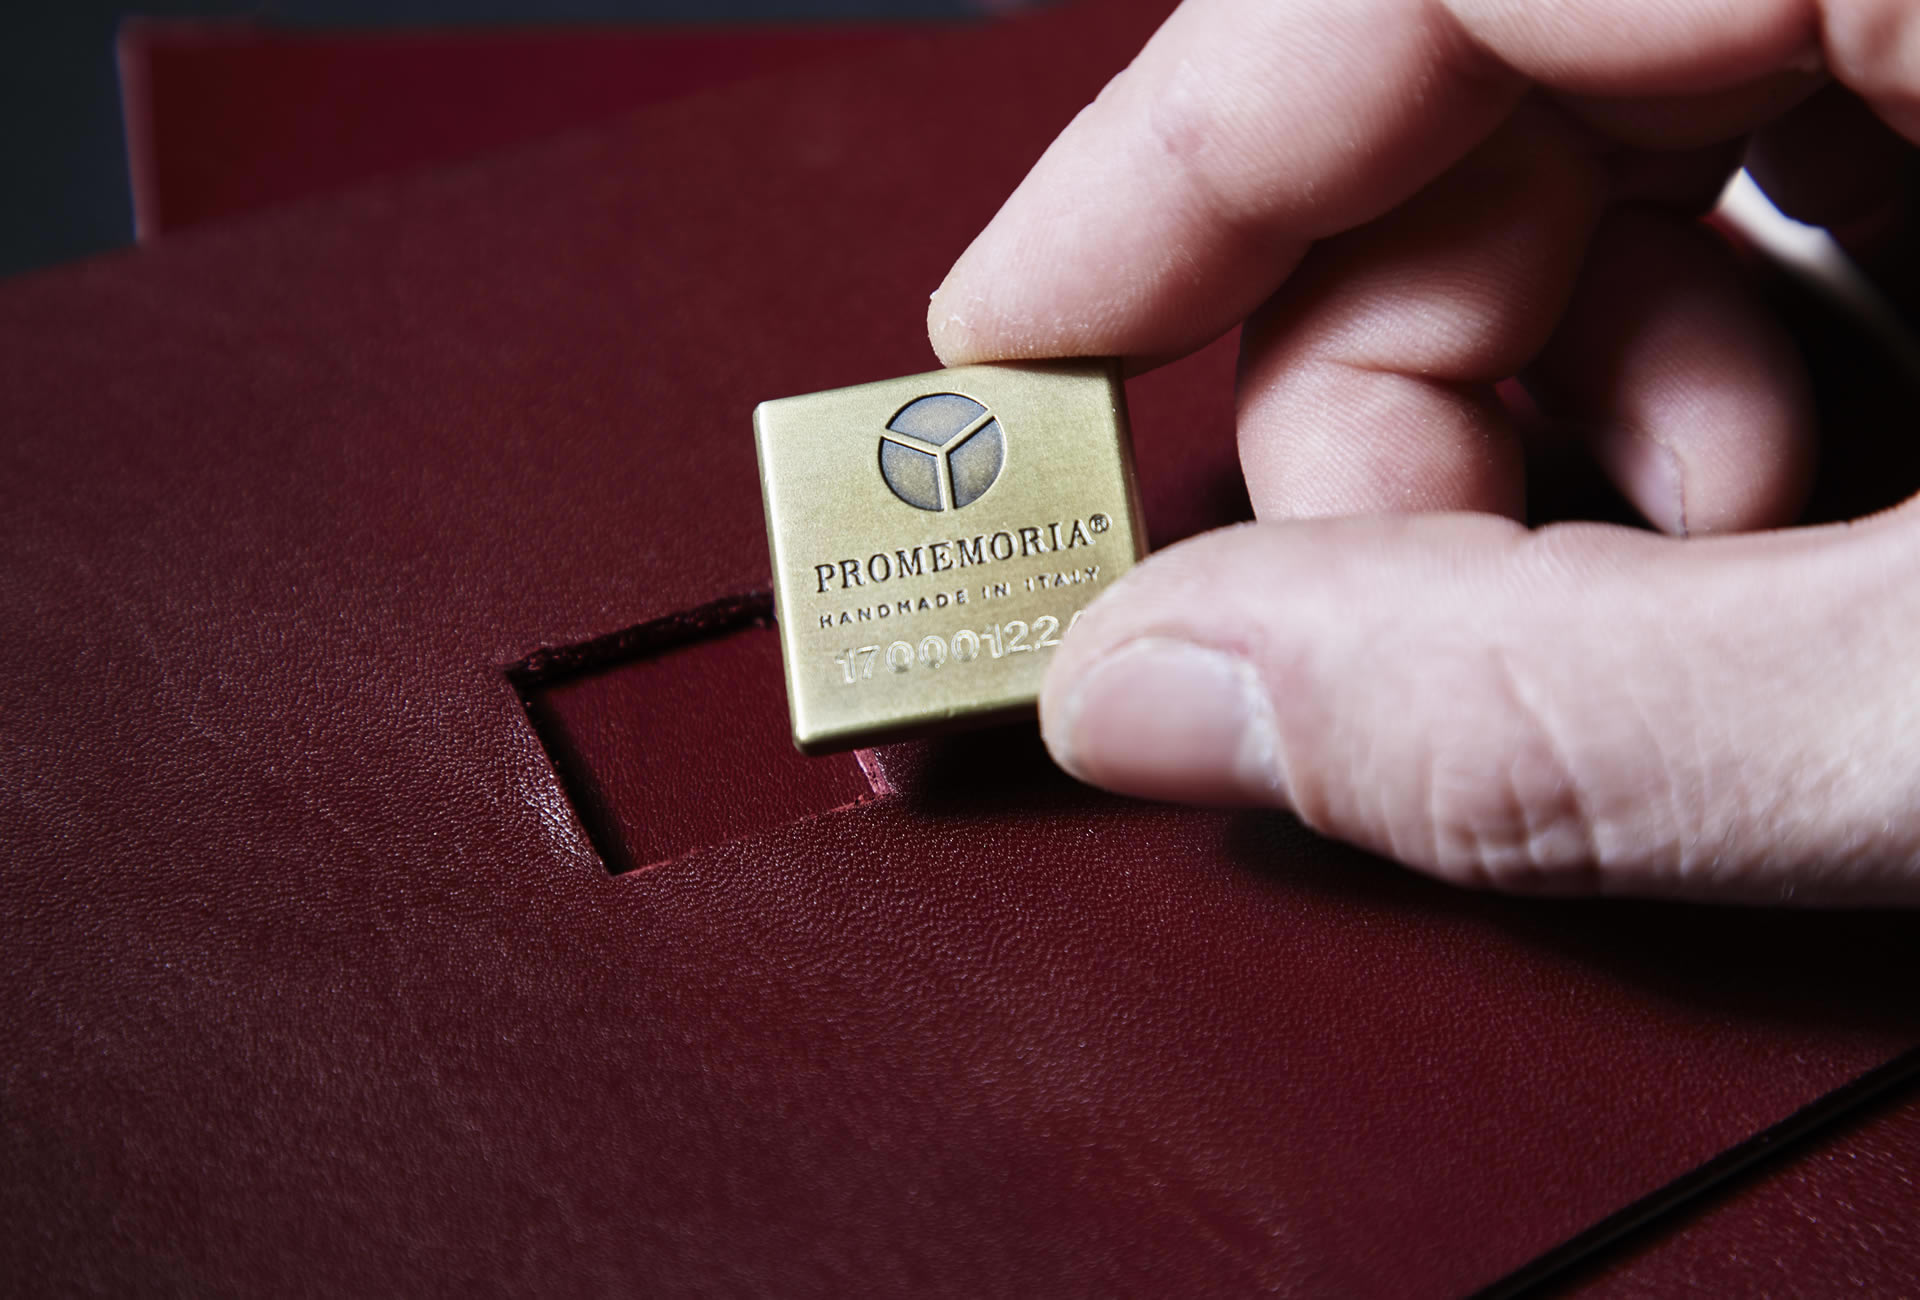 Promemoria has a quality and authenticity control process: every Promemoria product has a serial number and a Certificate of Authenticity | Promemoria